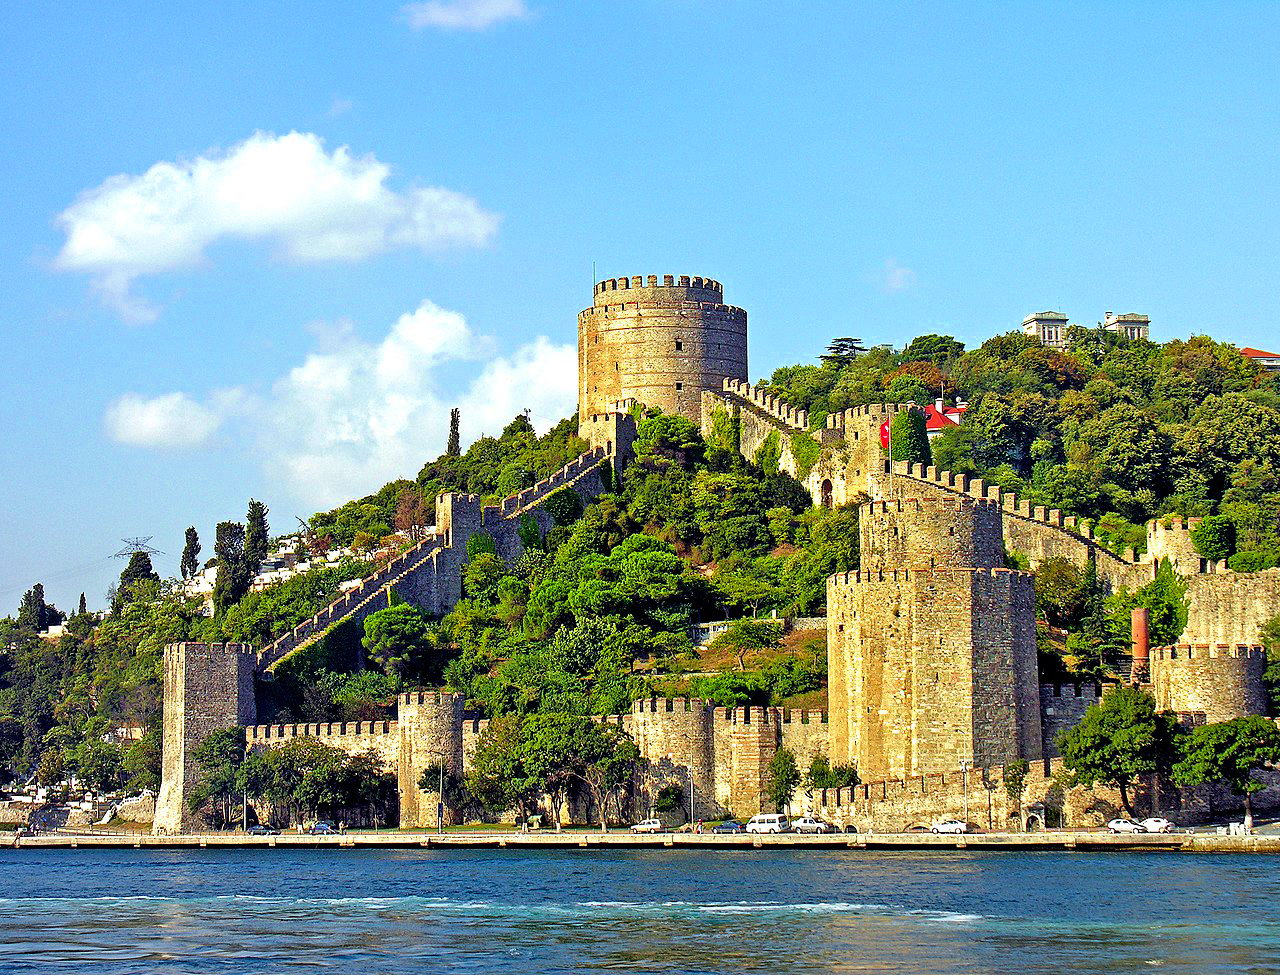 The majestic Rumeli Hisari Fortress situated on the European banks of the Bosphorus in Istanbul, Turkey. The fortress, made of stone walls and cylindrical towers, stretches across a lush hillside overlooking the sparkling waters of the Bosphorus. Green trees envelop the historical structure, and the clear blue sky above is dotted with a few white clouds. In the foreground, the serene waters reflect the stone walls of the fortress. This historic site stands as a testament to Istanbul's rich heritage.